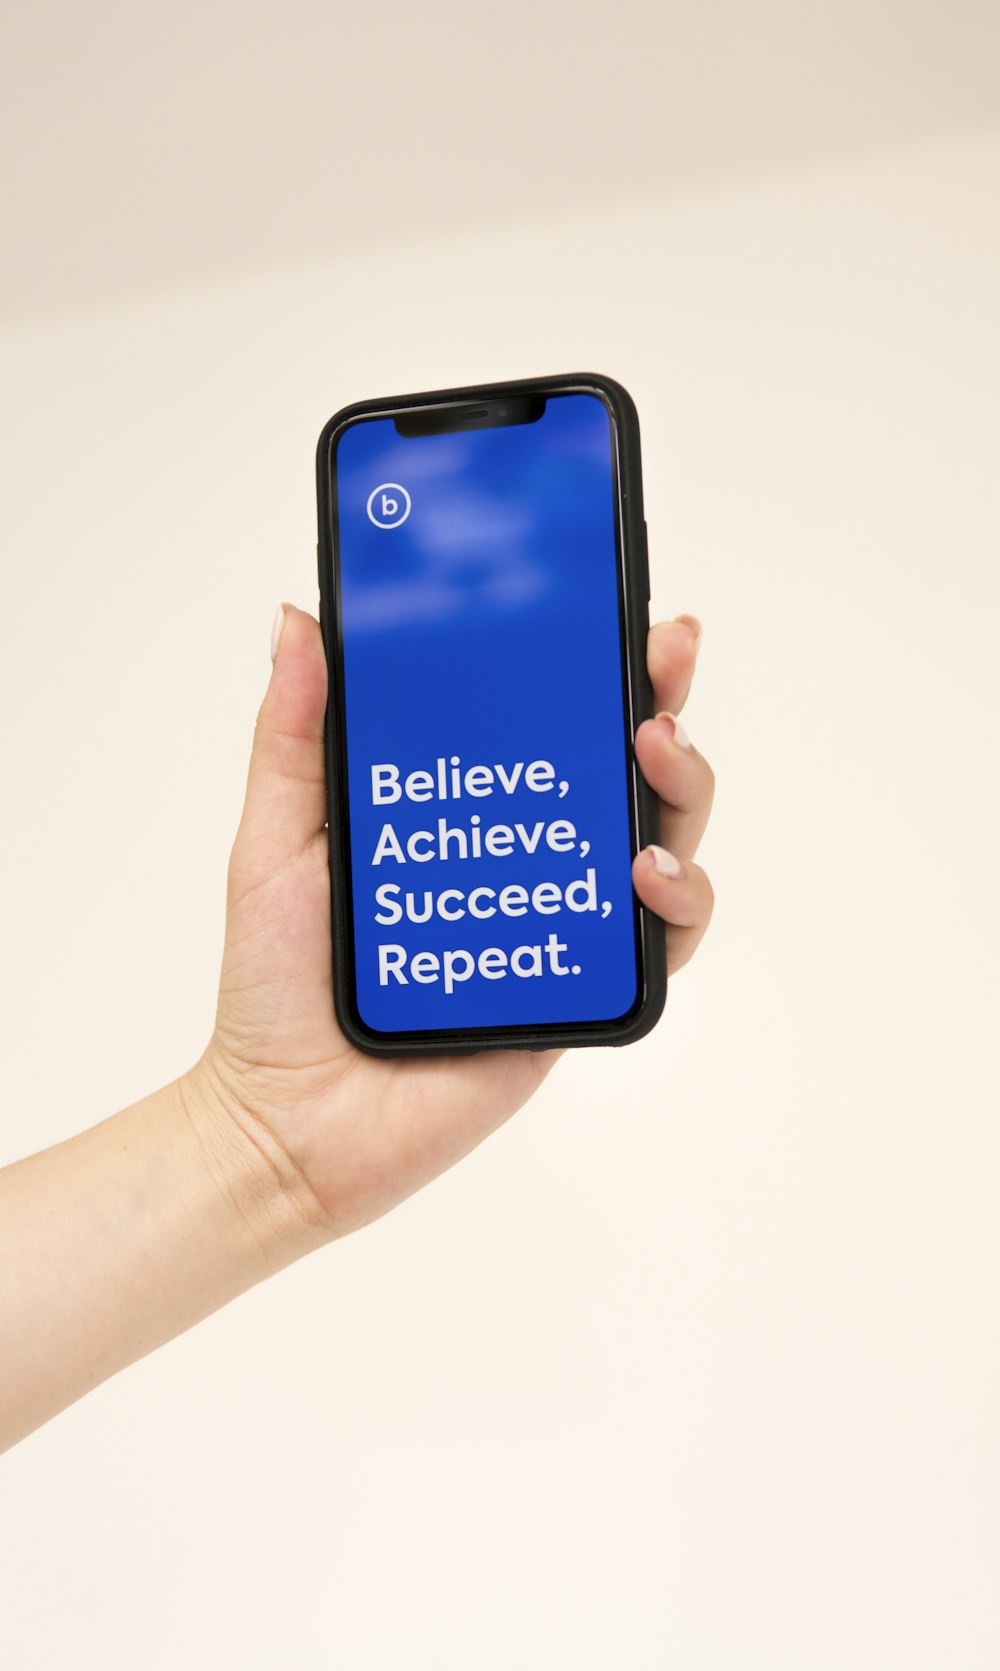 believe, achieve, succeed, and repeat quote